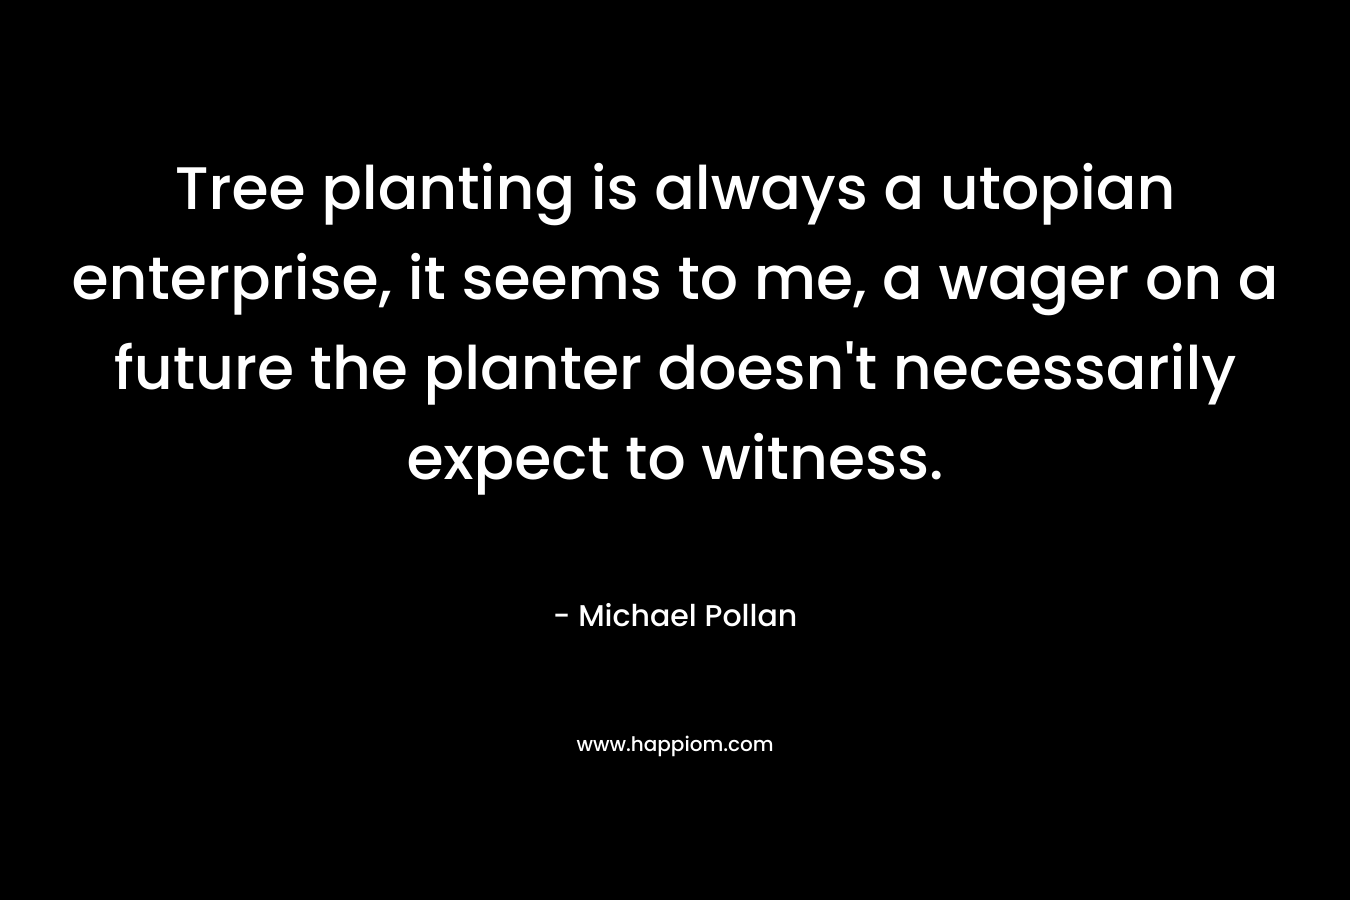 Tree planting is always a utopian enterprise, it seems to me, a wager on a future the planter doesn’t necessarily expect to witness. – Michael Pollan